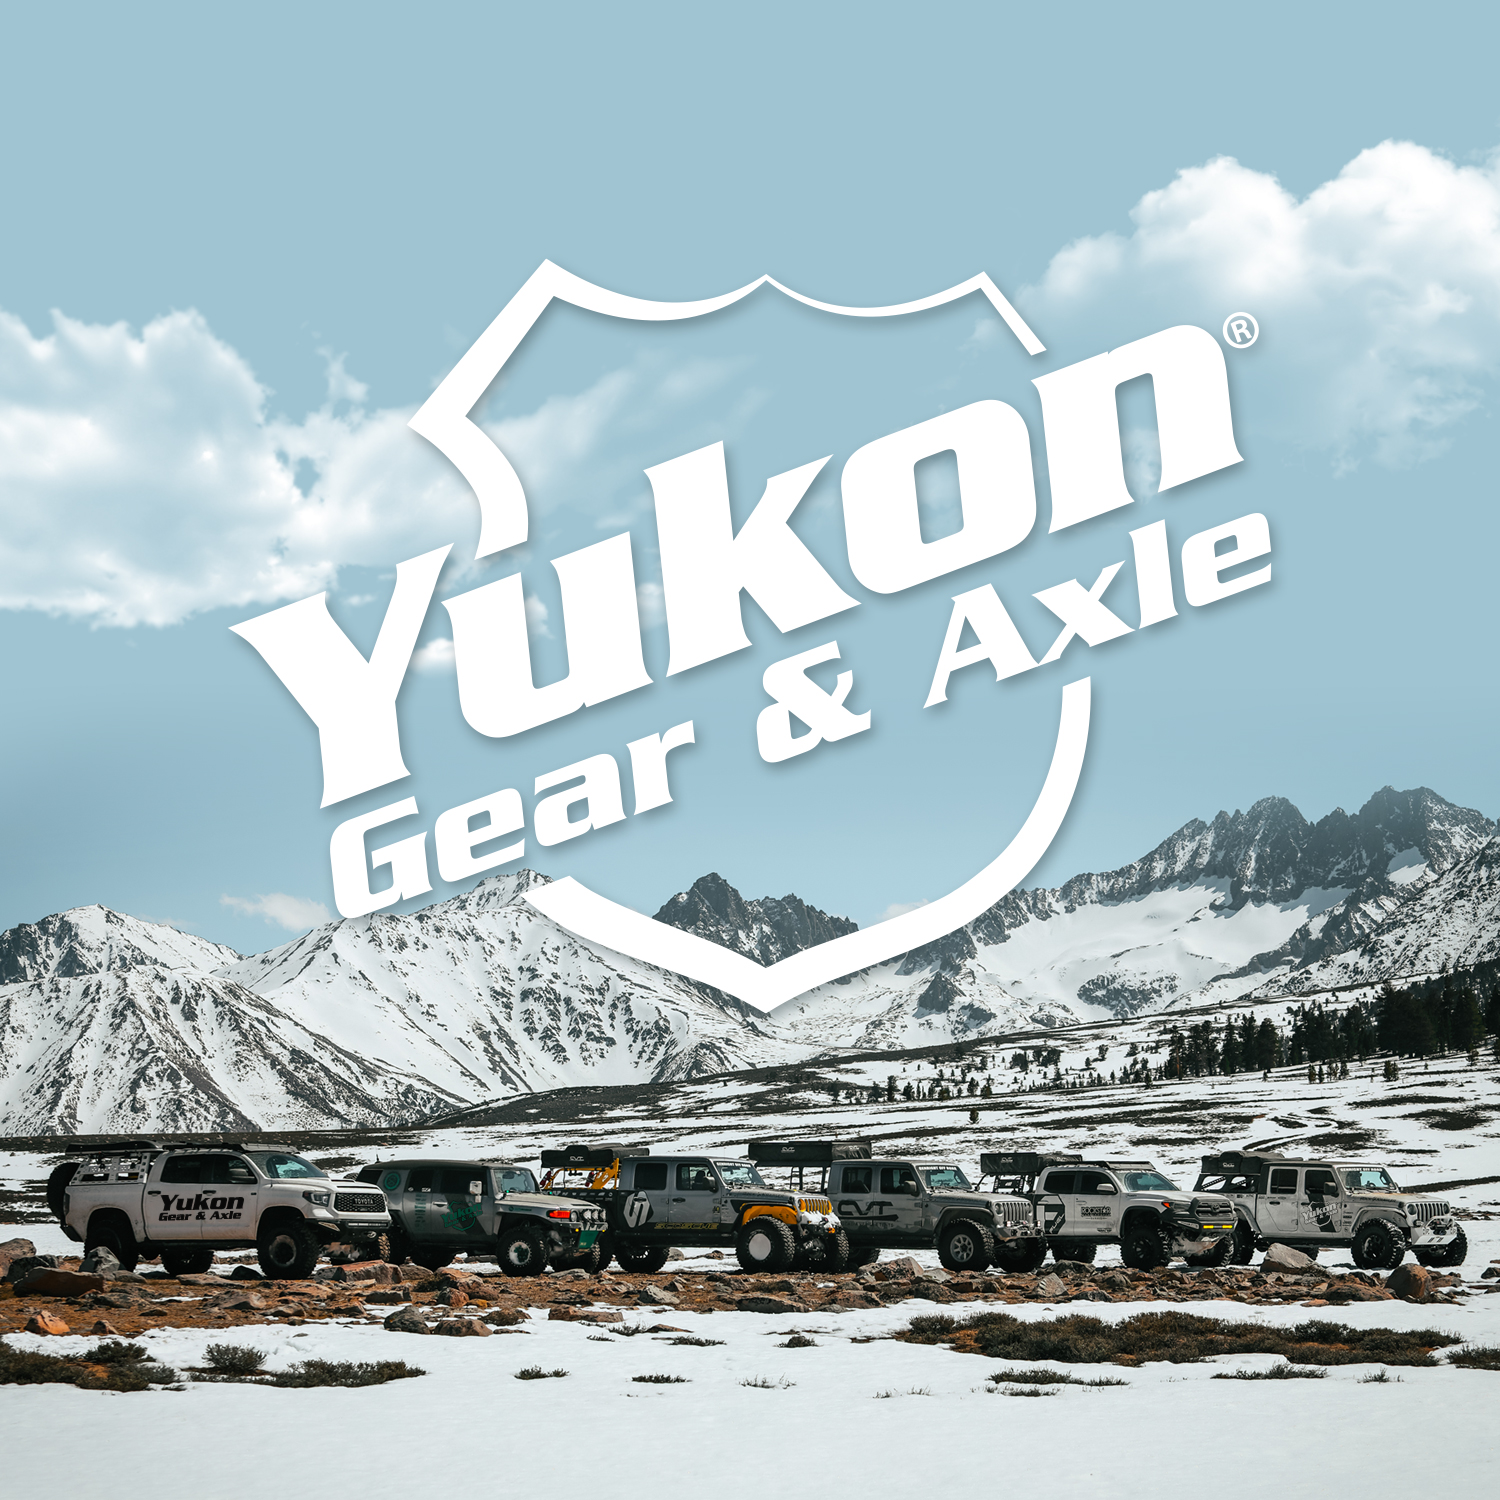 Yukon small hole yoke for '82 and older Toyota 8" and Landcruiser with 27 spline